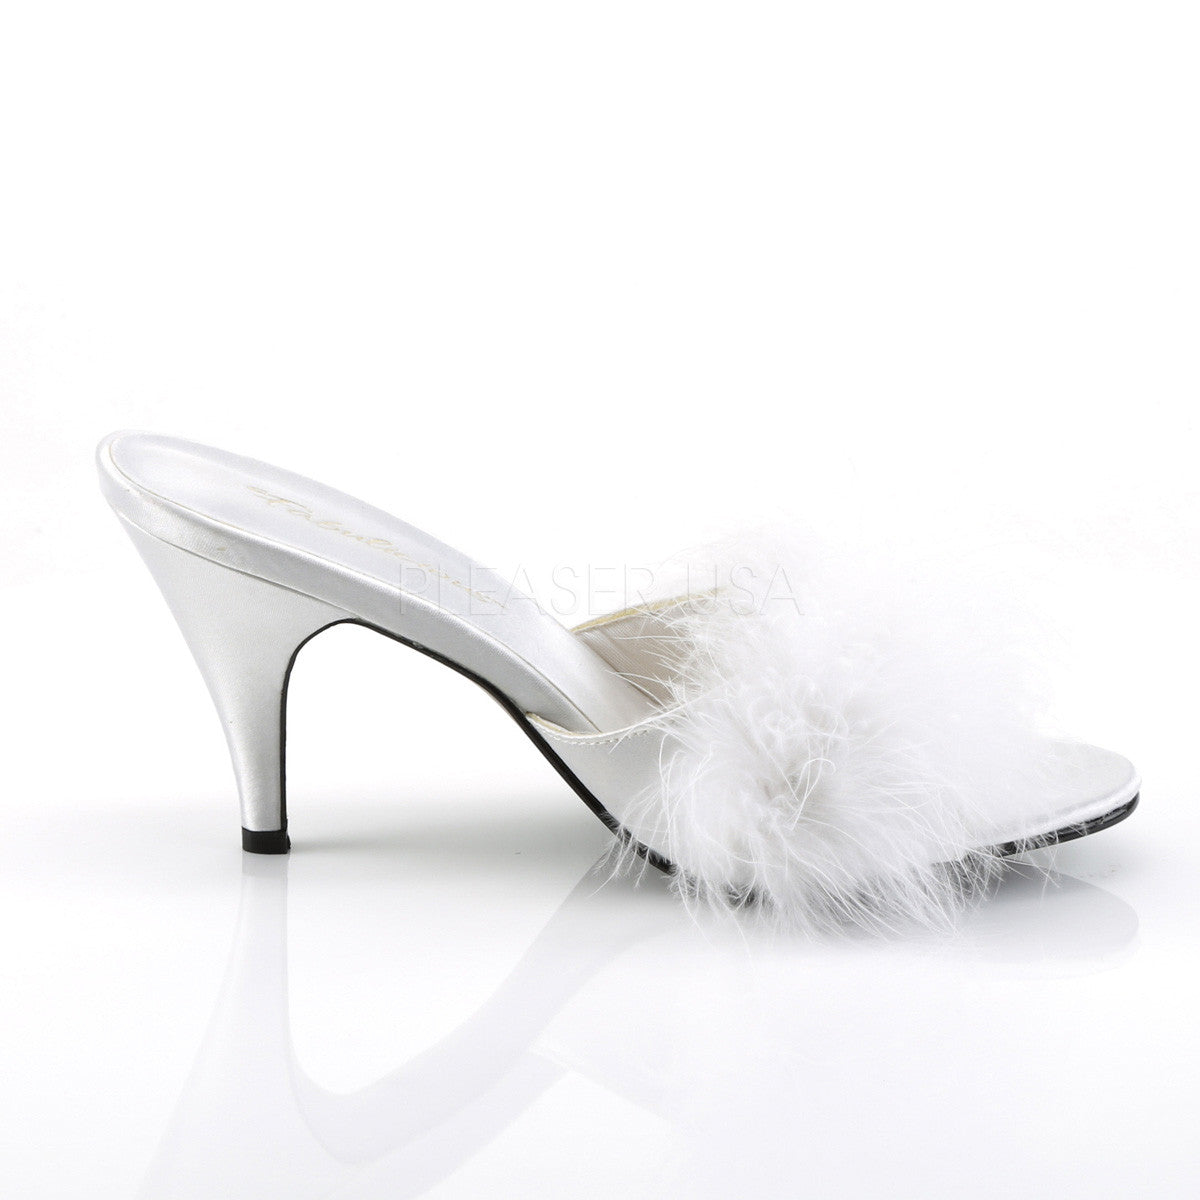 FABULICIOUS AMOUR-03 Wht Satin-Fur Classic Slippers - Shoecup.com - 5